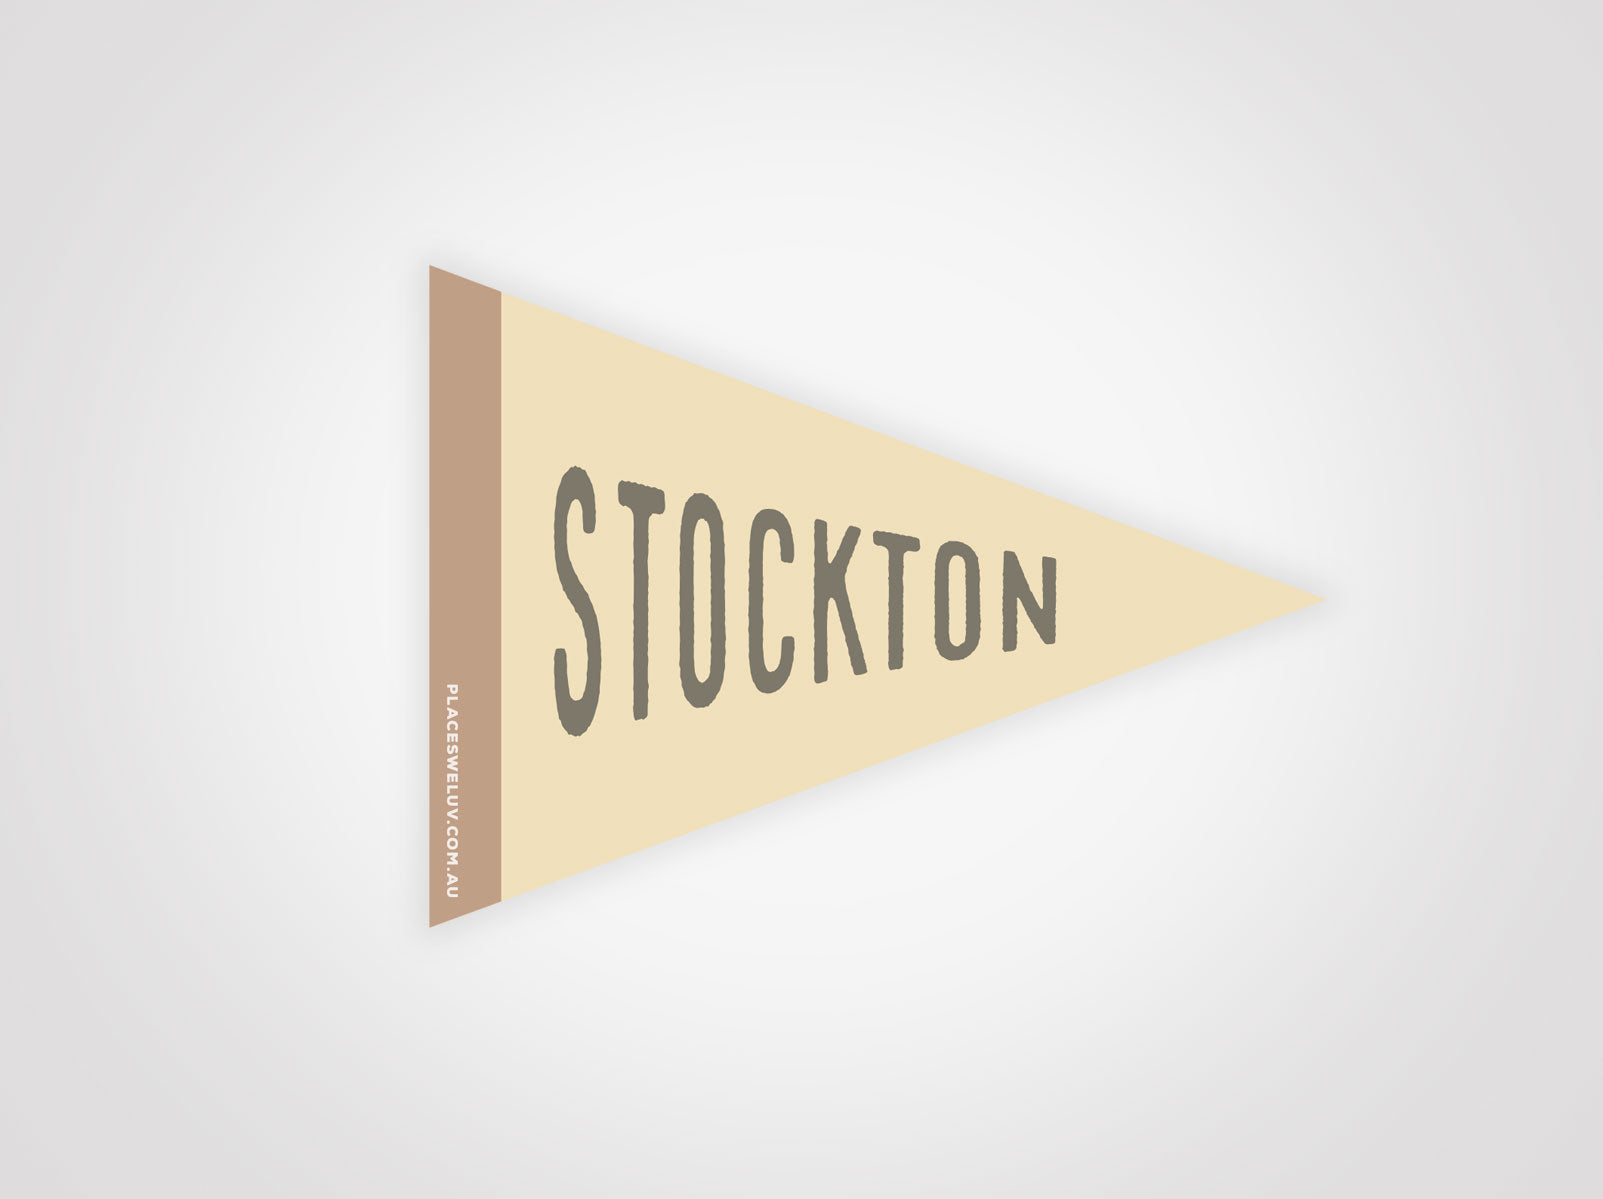 Stockton vintage style travel flag decal by places we luv